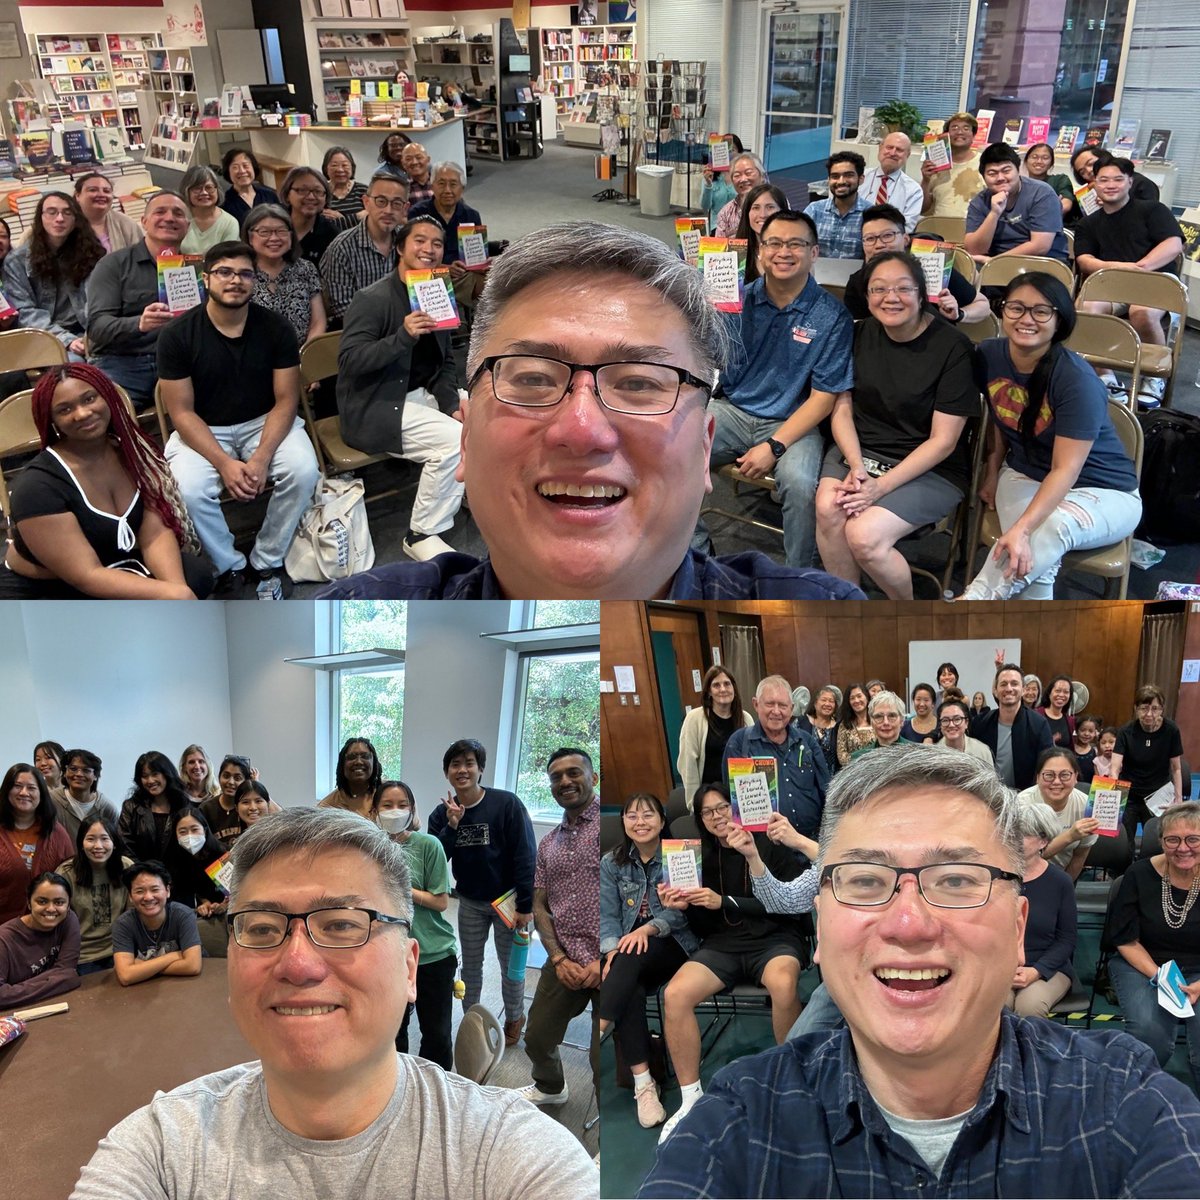 Texas in the house! #Houston! #Austin! Thnx @ocagreaterhouston @utcaas @brazosbookstore @austinpubliclibrary @shoesbags13 @ramey_ko for an excellent time. Hope to see you all in the fall! #Dallas #SanAntonio, are you in? @littlebrown